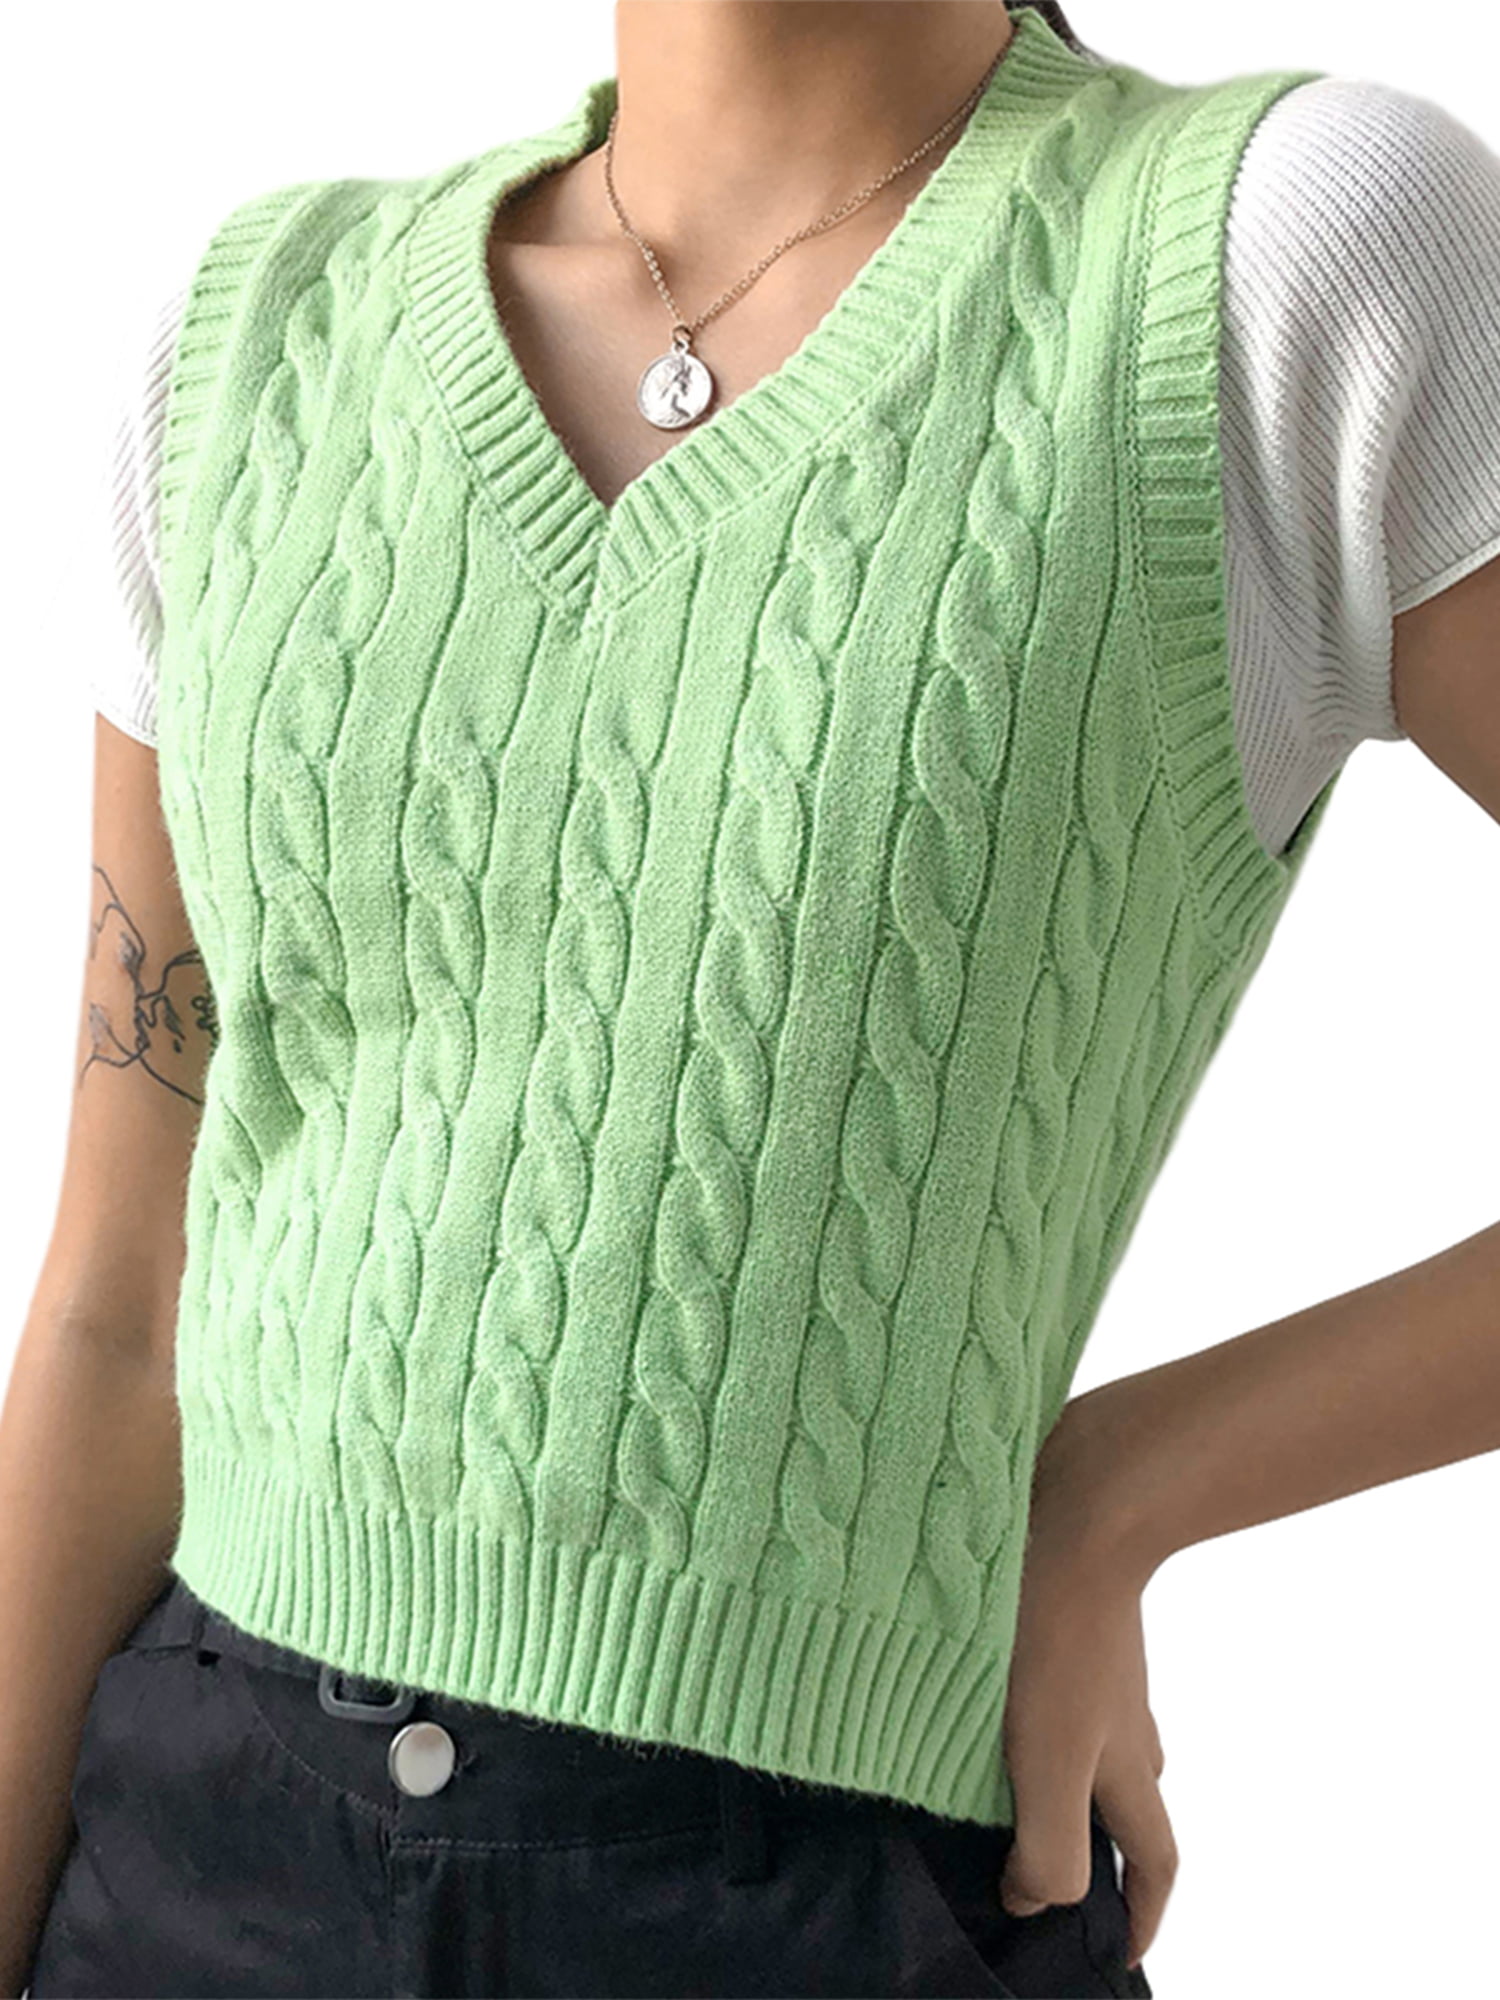 Women Sweater Vest Crop Top V Neck Sleeveless Plaid Knitted Sweaters Casual Patchwork  Vintage Tank - Walmart.com